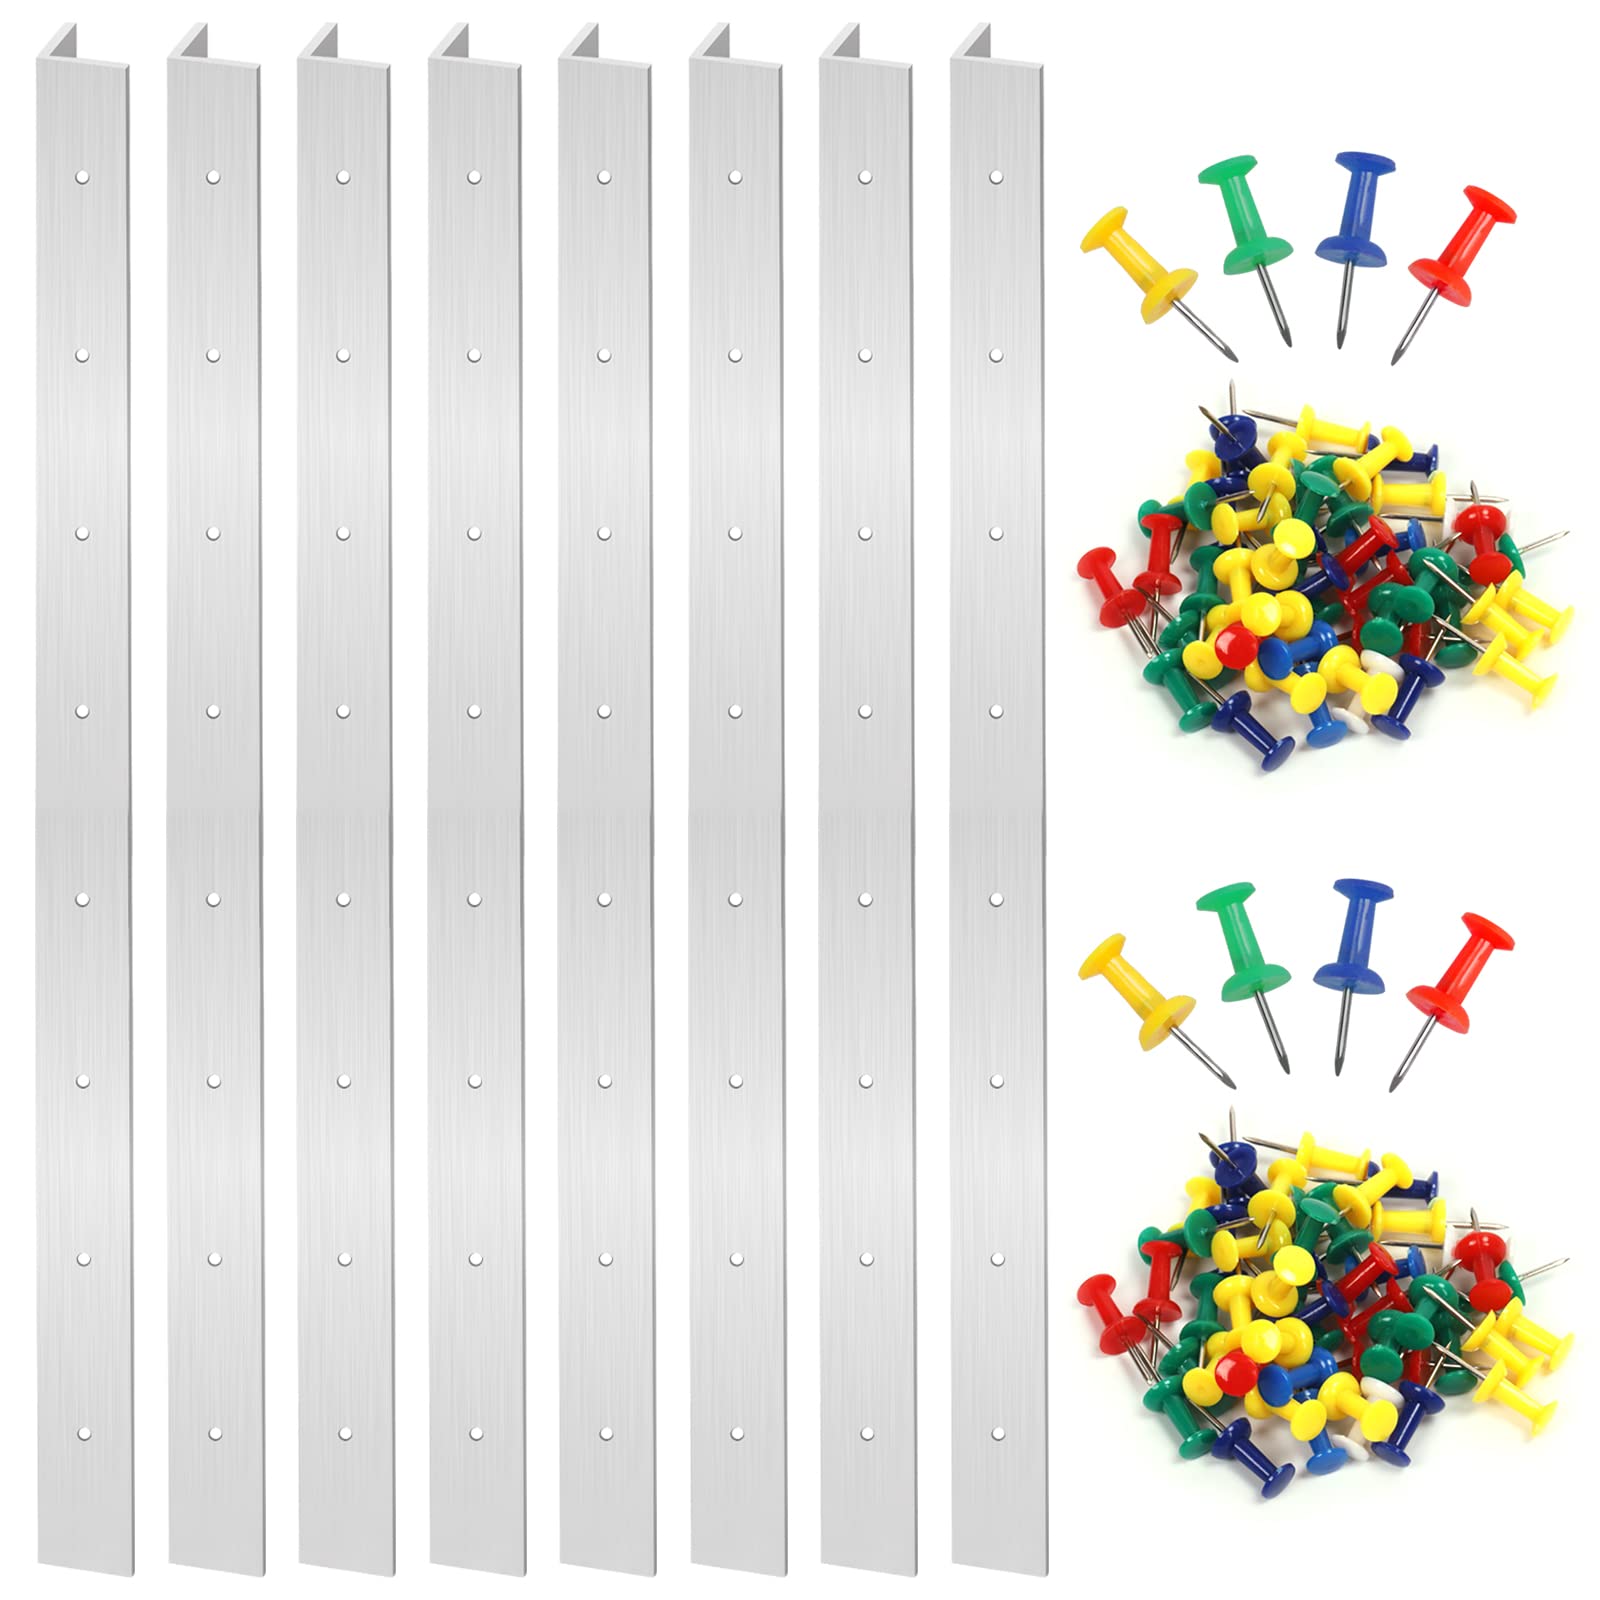 Glarks 72Pcs 3 Inch 6 Inch 12 Inch Stained Glass Supplies Layout Block  System with Mix Color Push Pins Tools Kit for Stained Glass Panels Craft  3/6/12